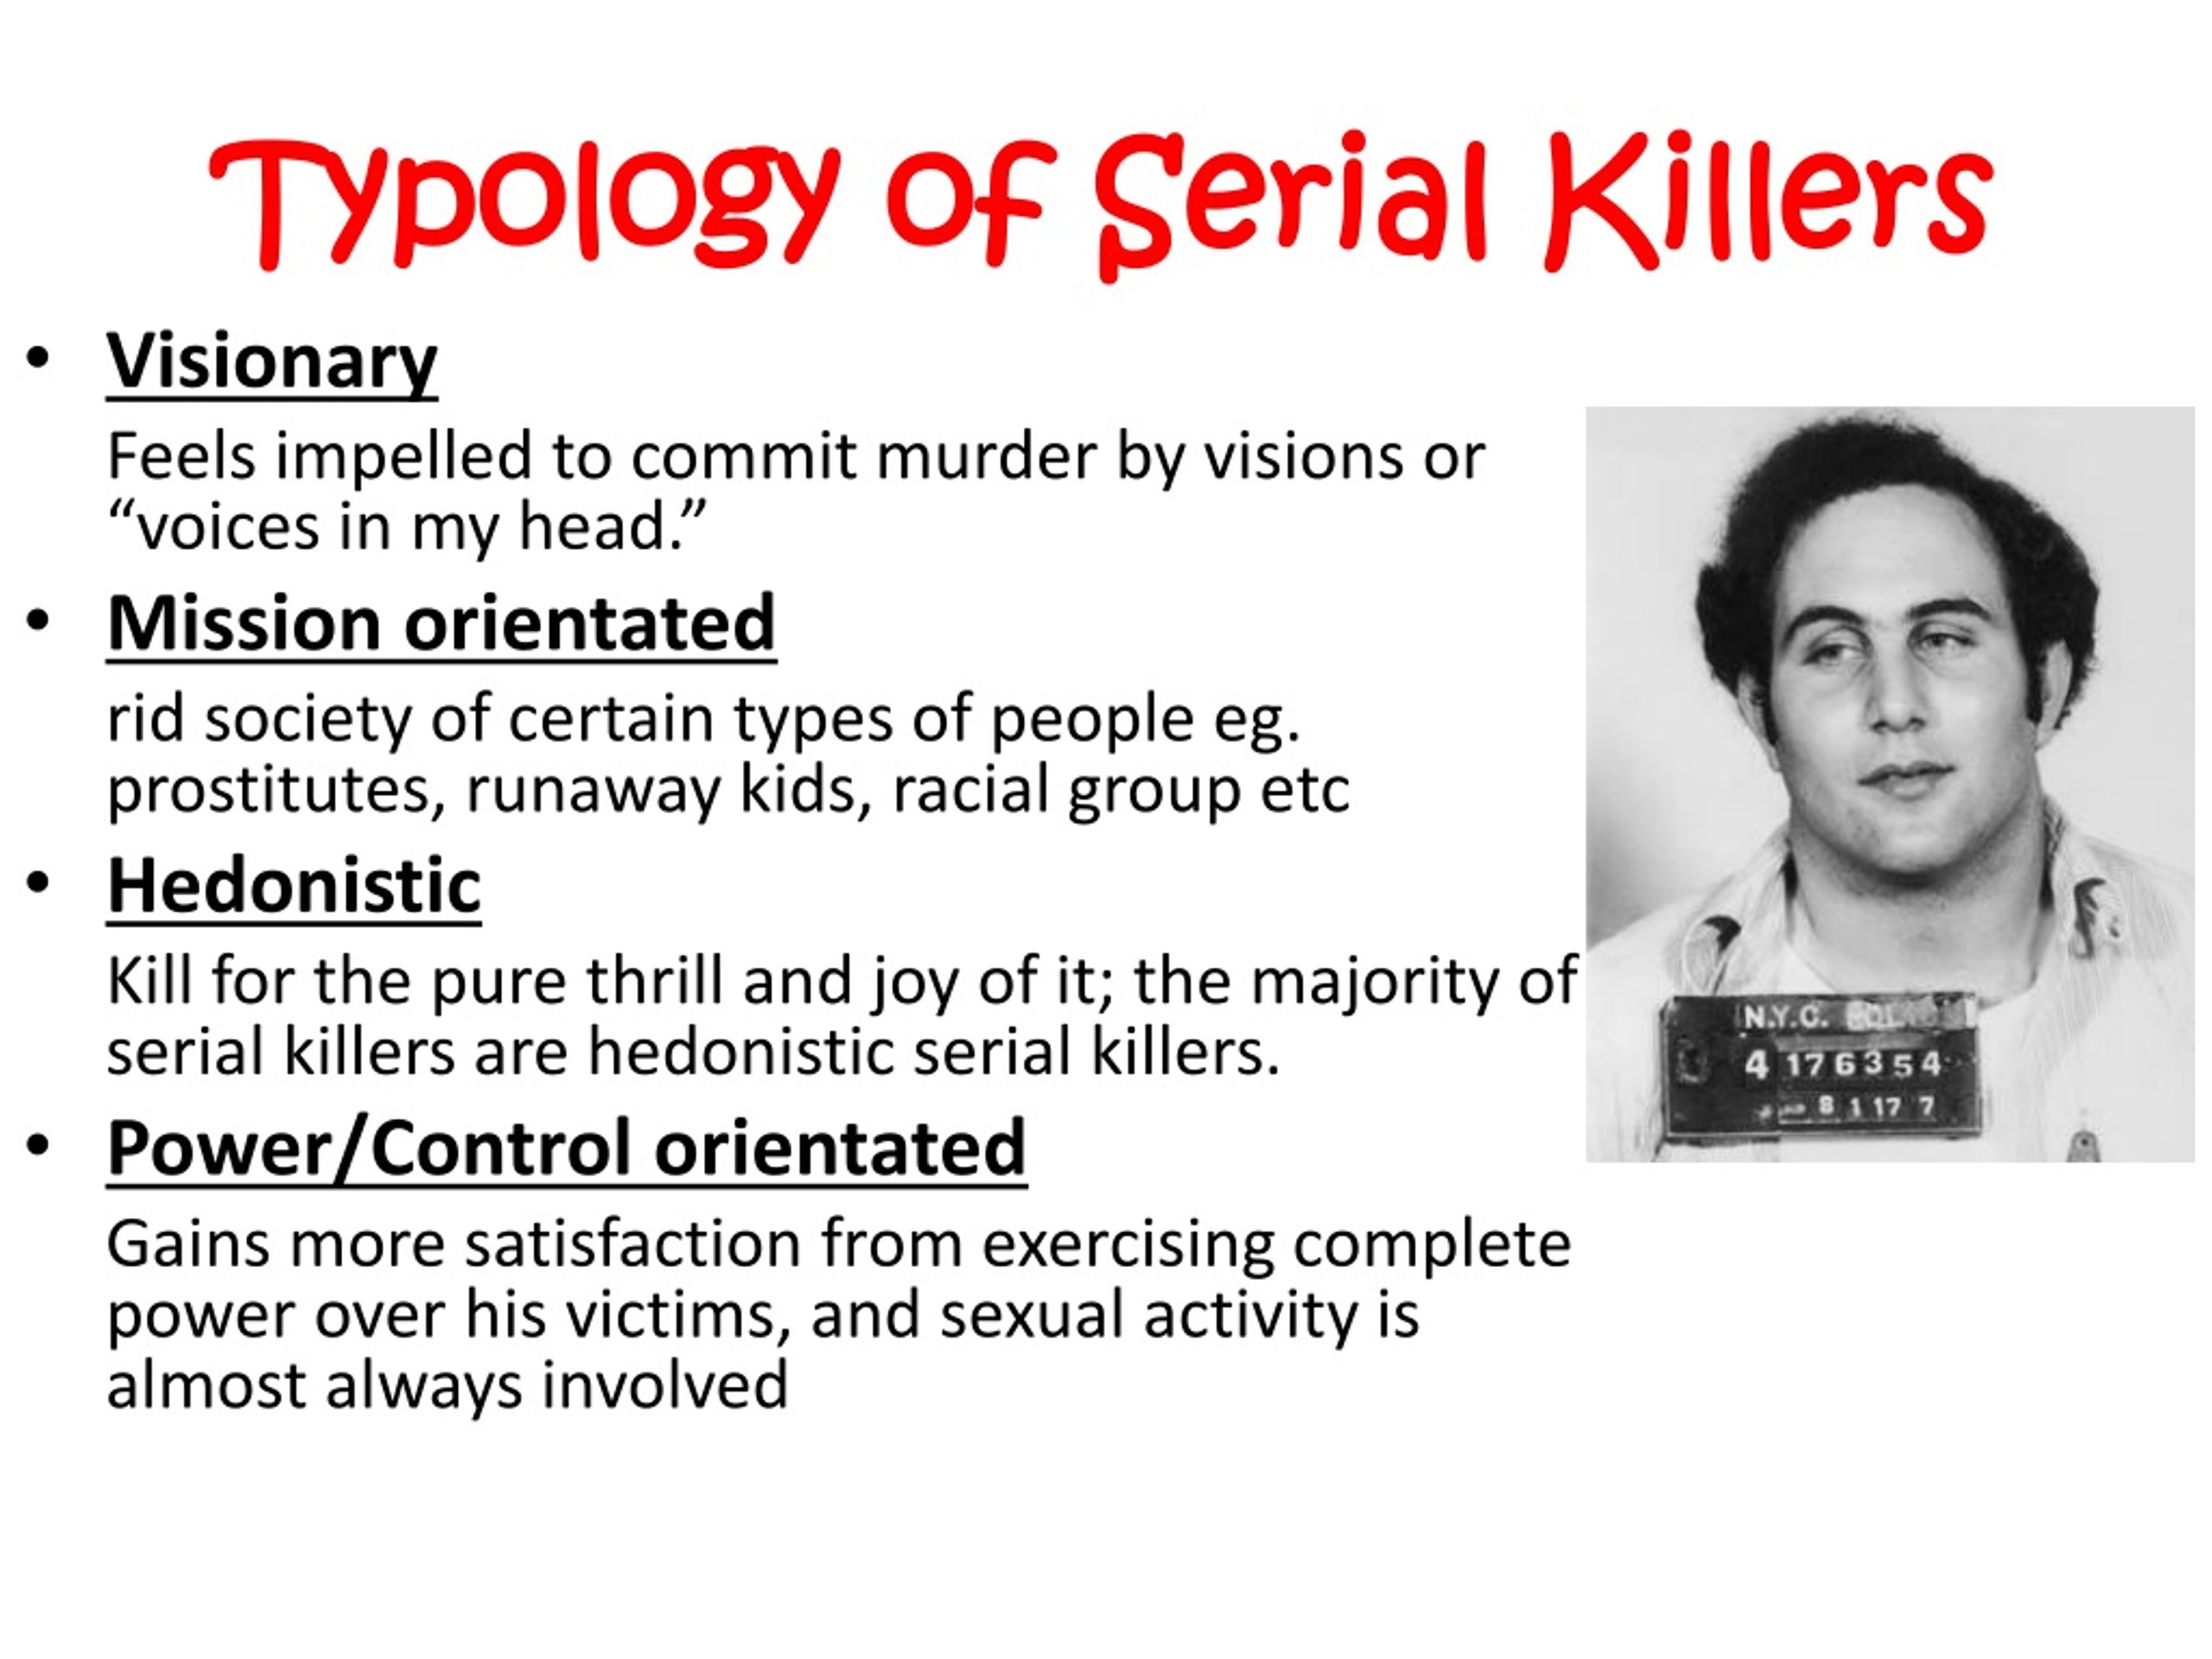 Mission oriented serial killer examples - hoolifi